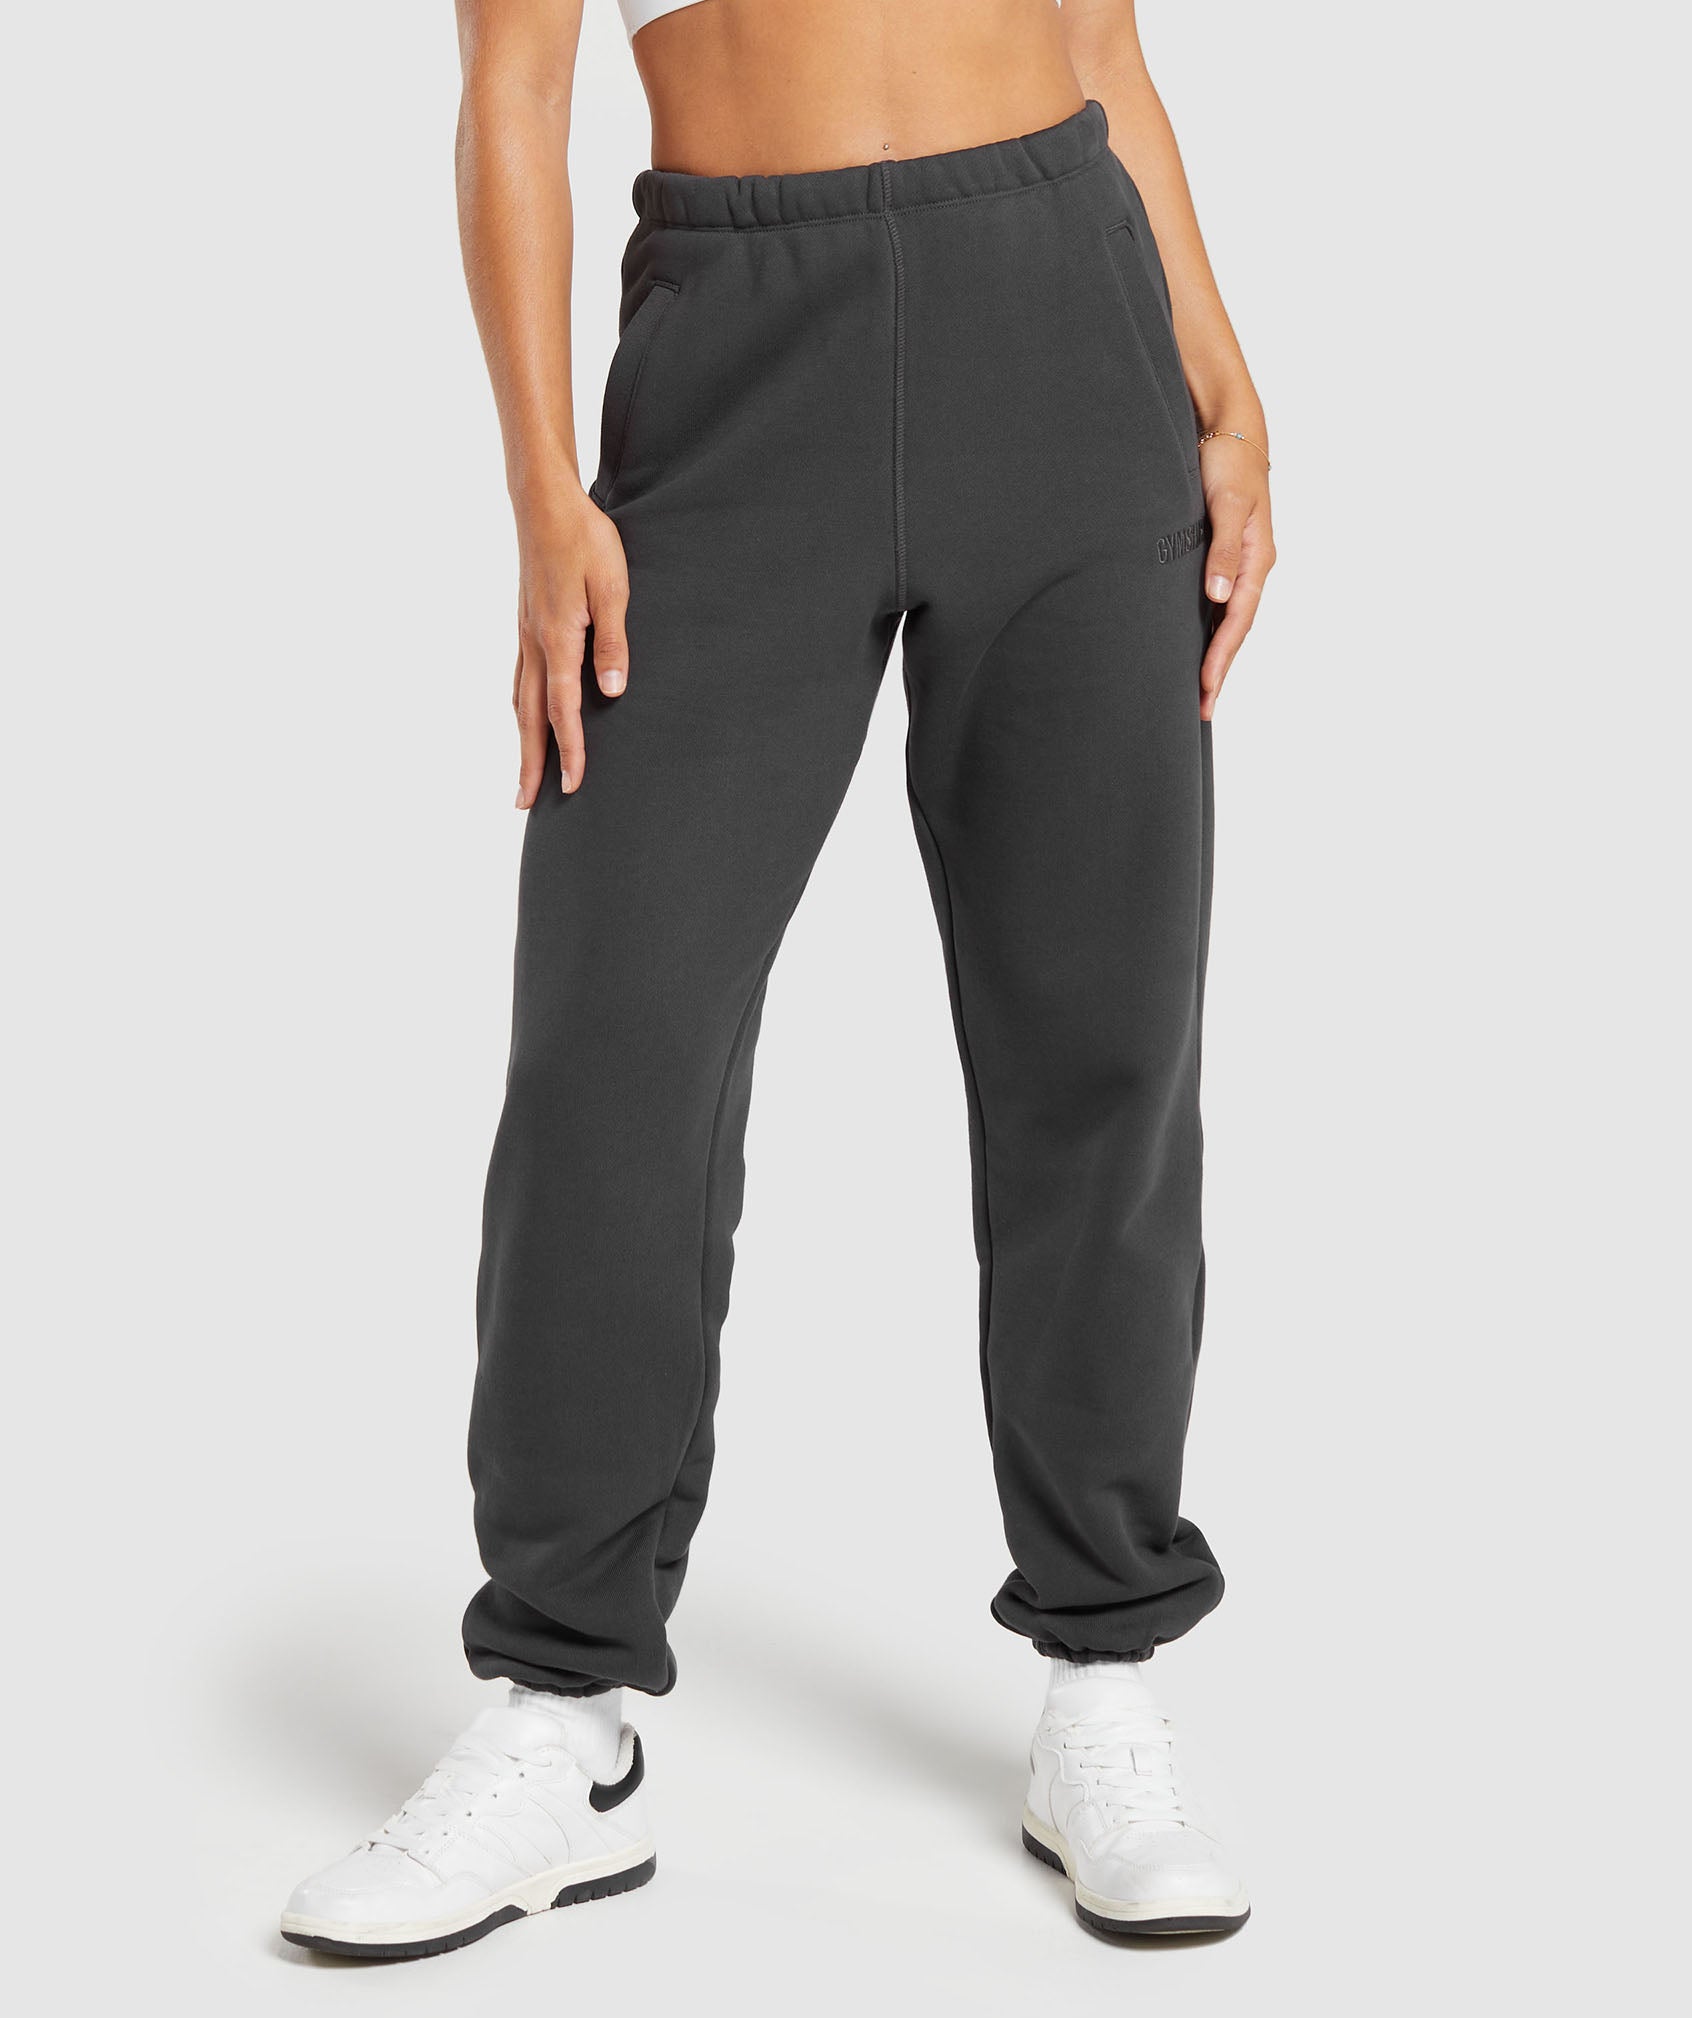 High Waisted Joggers for Women